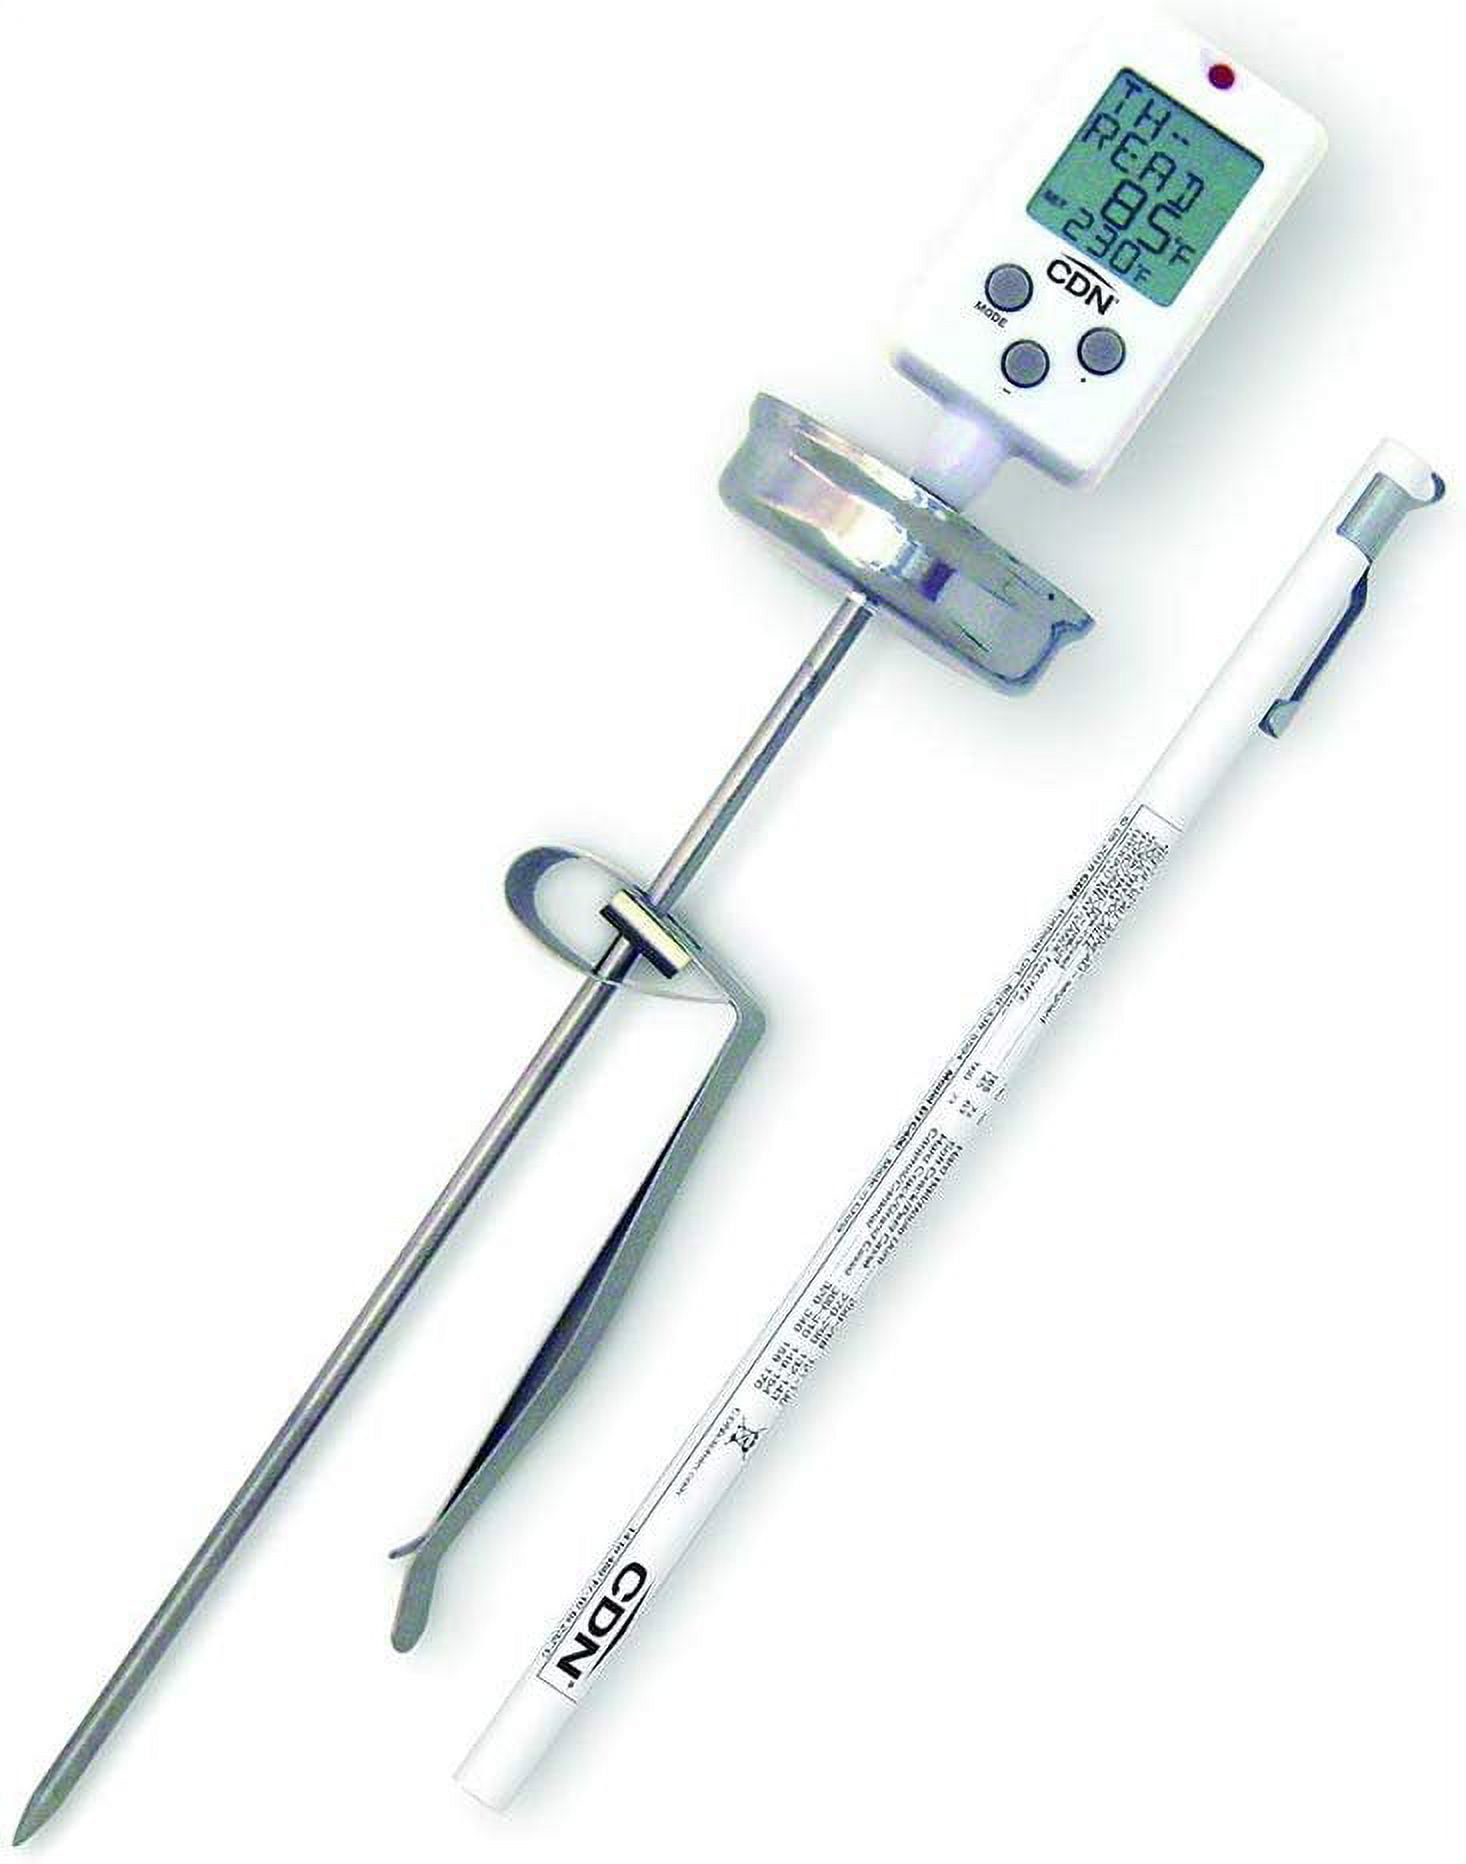 CDN Digital Candy Thermometer Model DTC450 